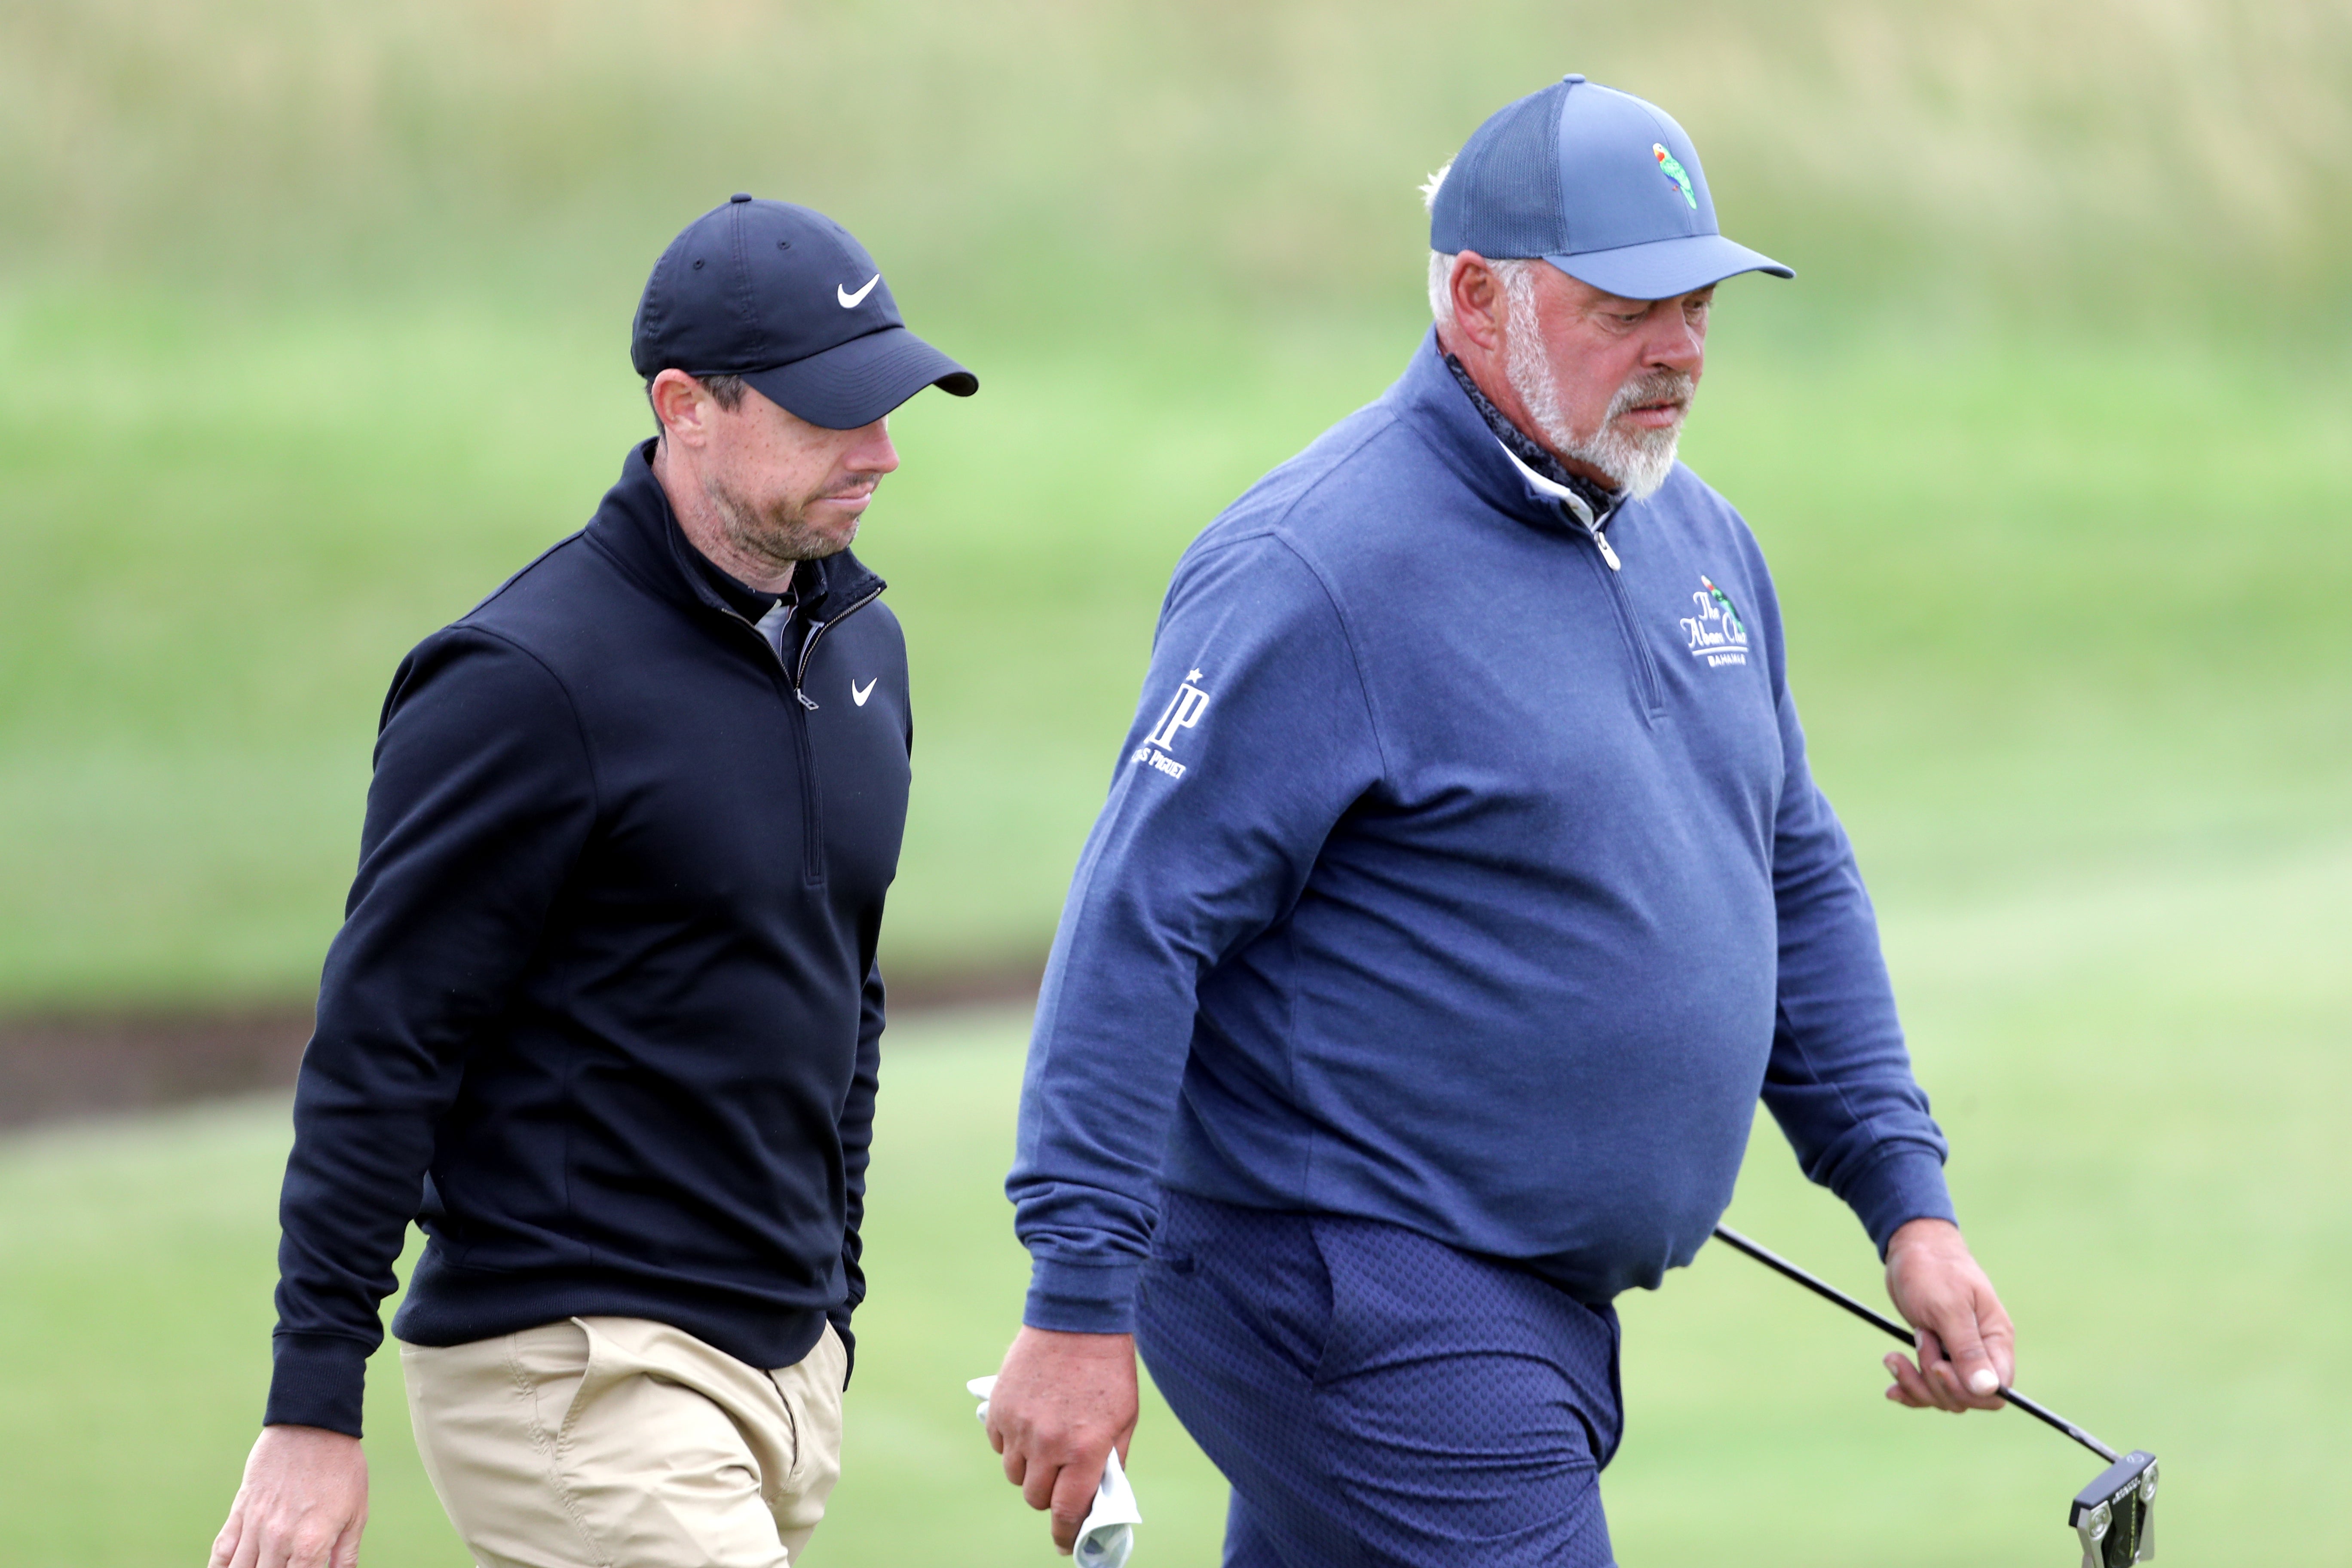 Darren Clarke urges Rory McIlroy to trust his talent in bid to end drought | The Independent